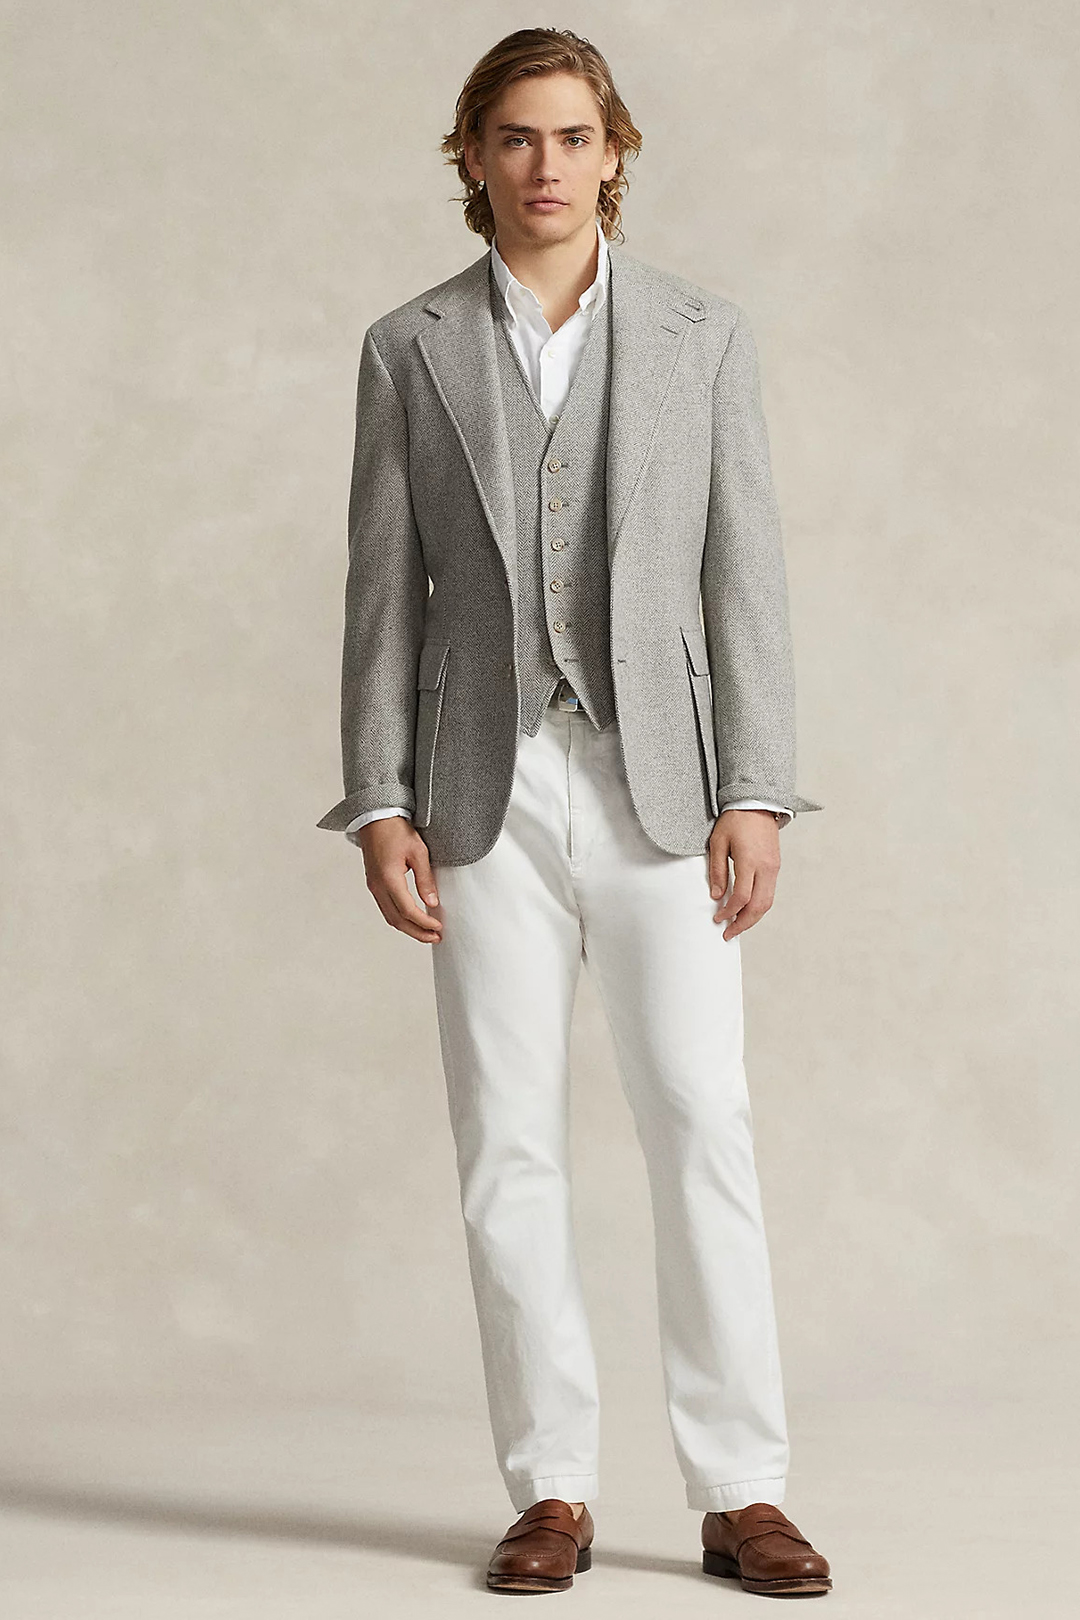 Gray blazer, gray waistcoat, white dress shirt, white pants, AND brown loafers outfit